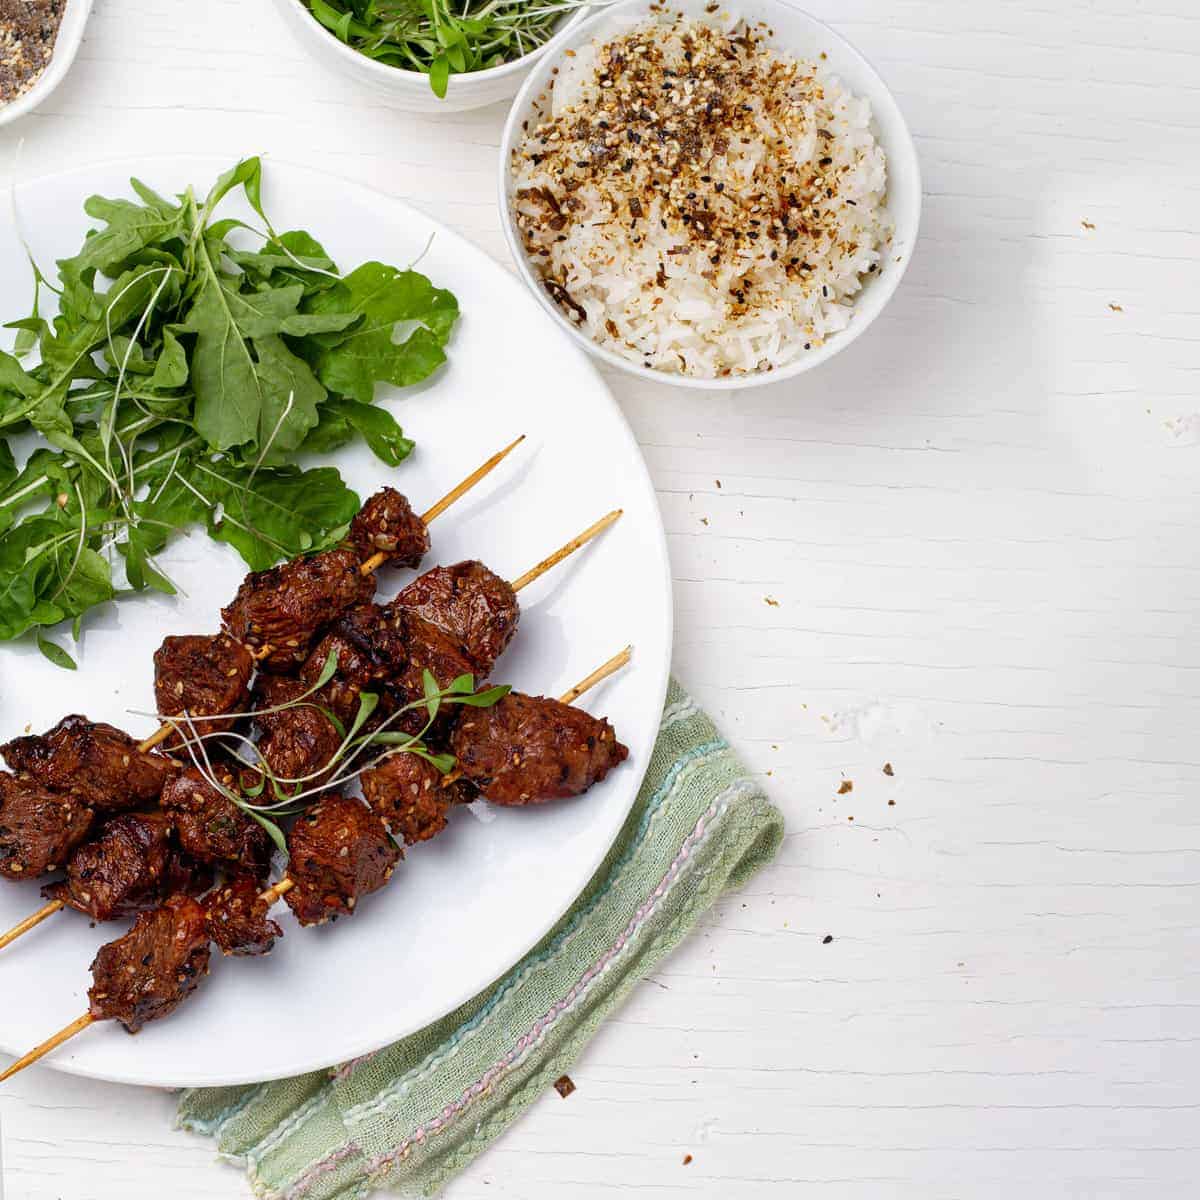 A plate of Green Tea Beef Kebabs with leafy greens beside a plate of seasoned rice.